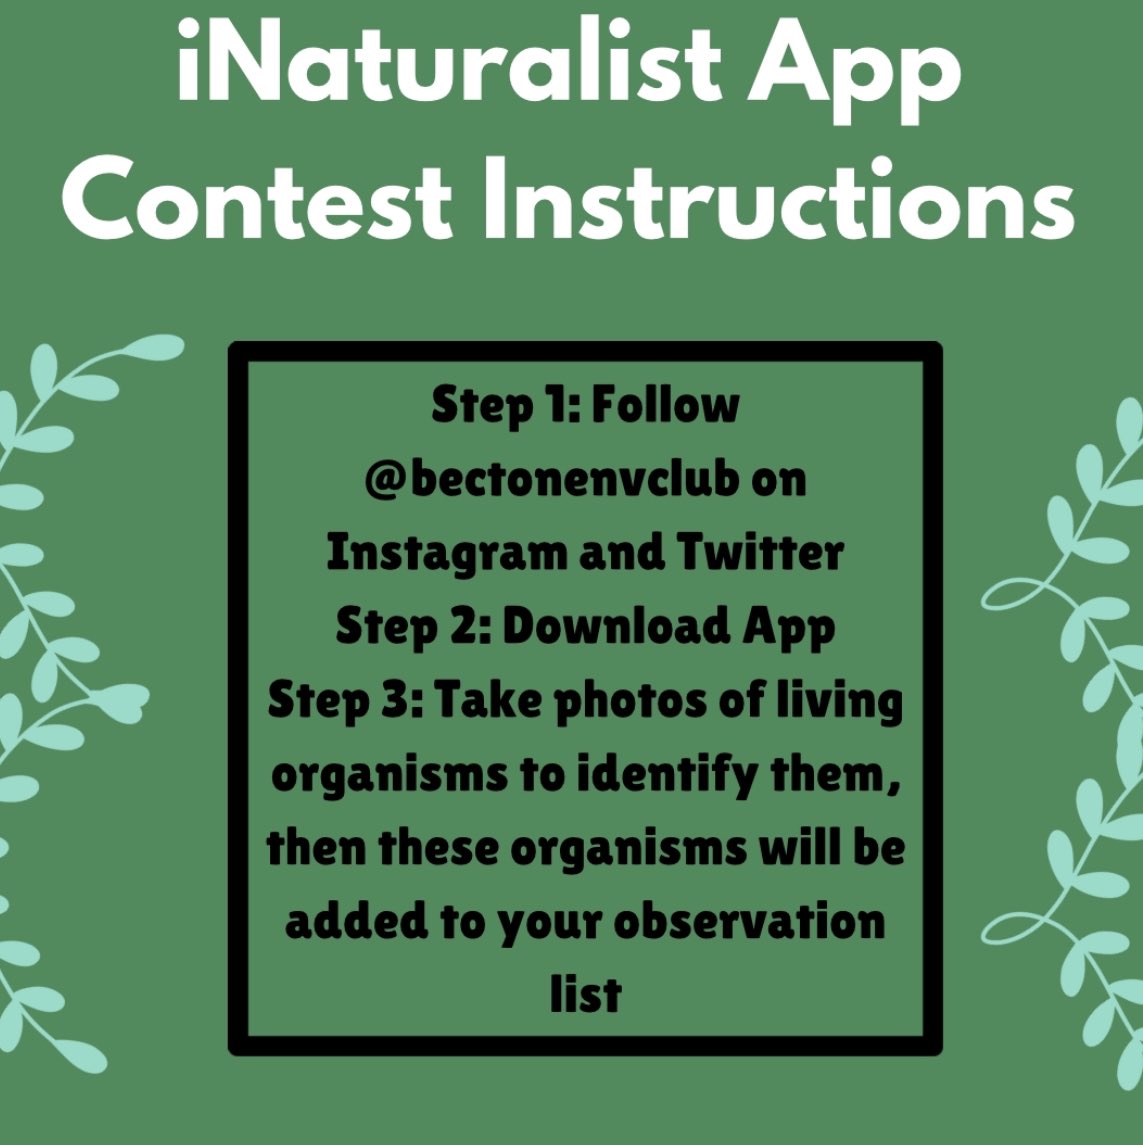 Happy Earth Week! 🌎💚💙 In honor of celebrating the Earth, the Environmental Club is holding an iNaturalist Challenge lasting from today, 4/22, until Friday, 4/26, with prizes to be won!! Check through the slides to see more information!! 🌍🌳♻️